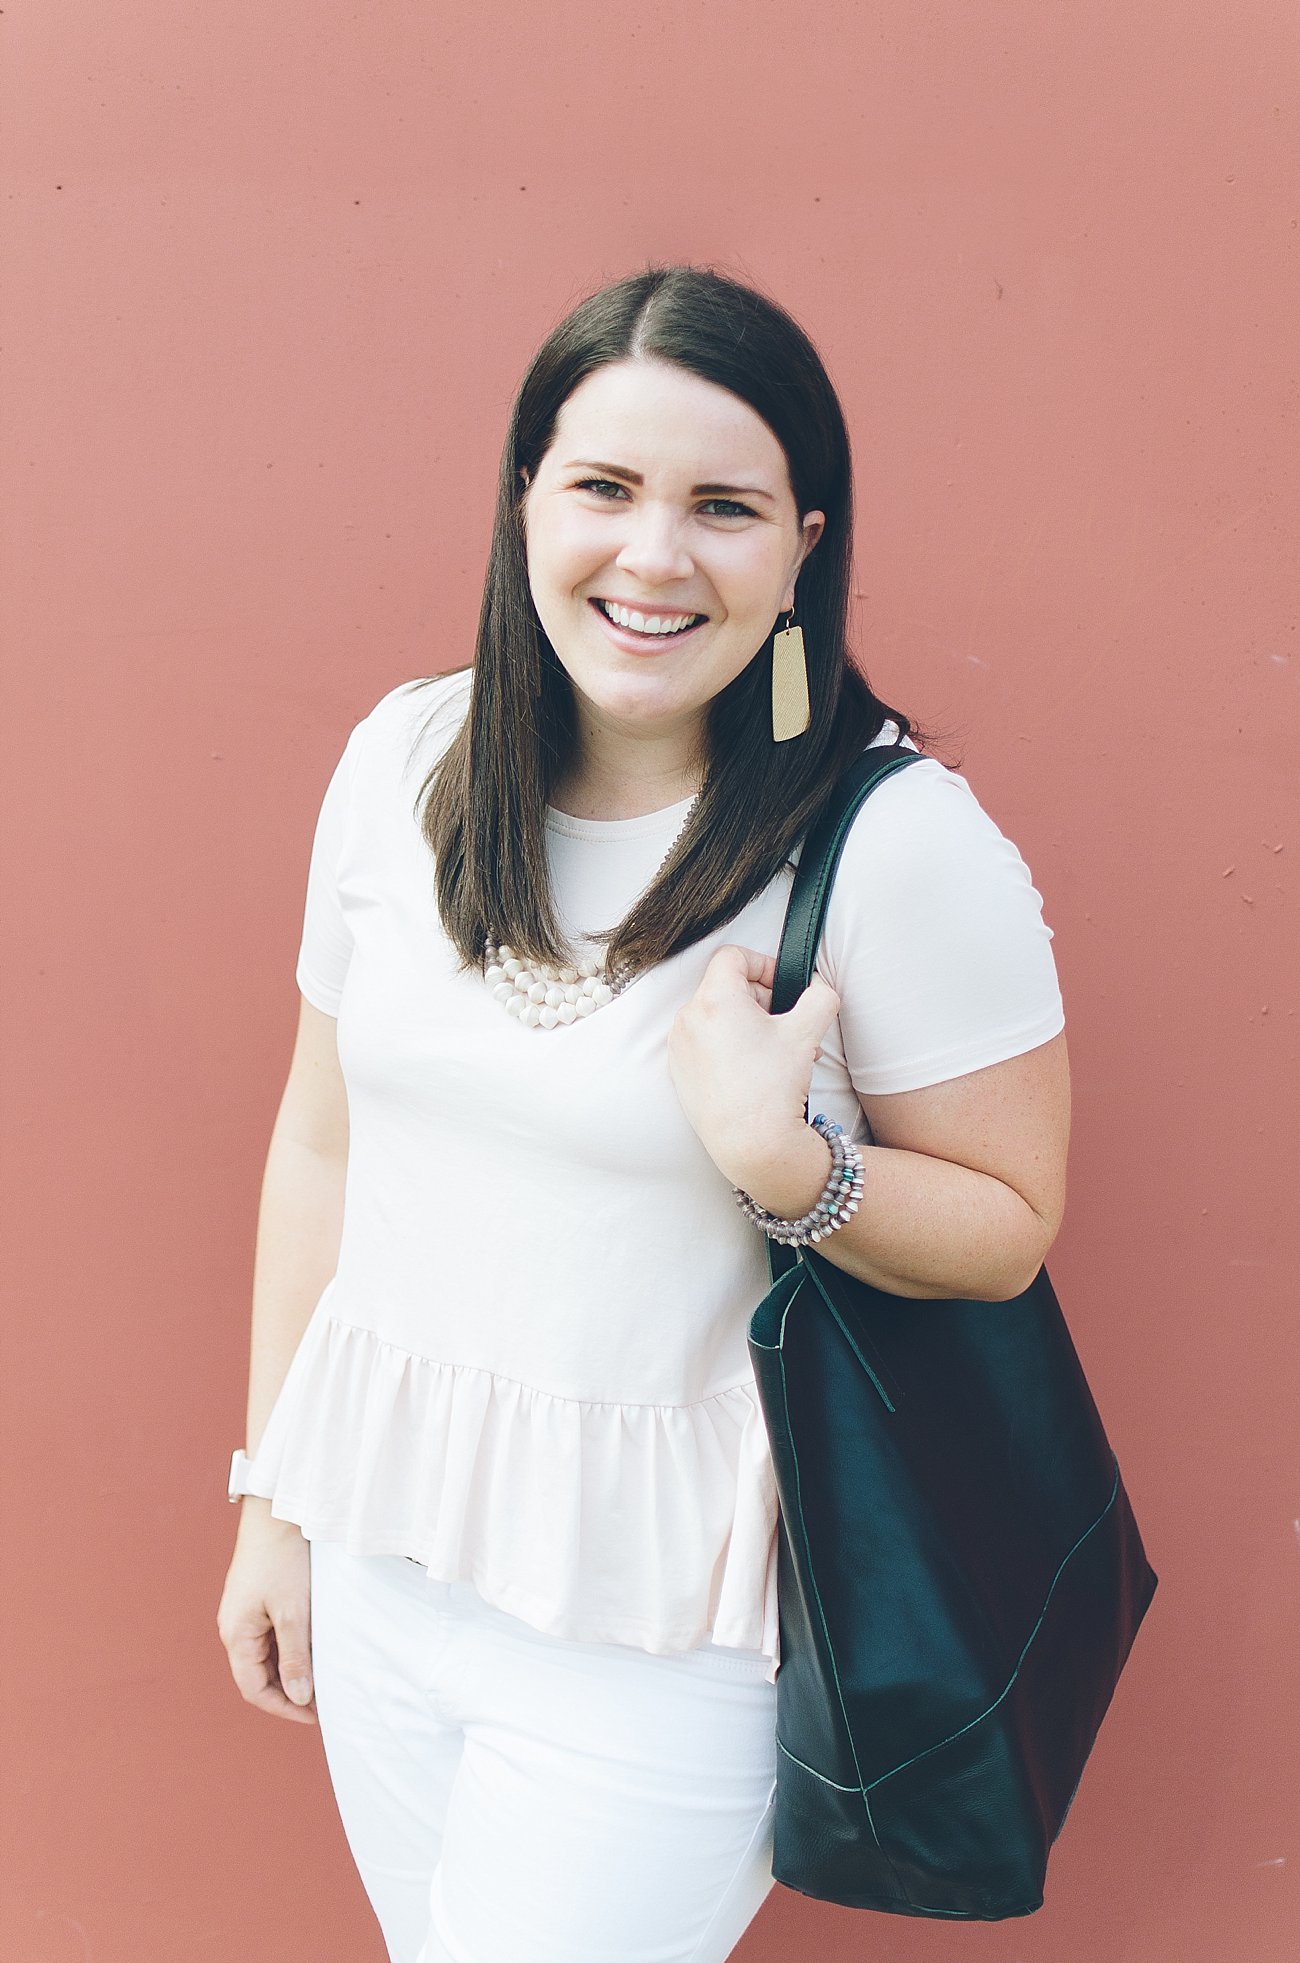 31 Bits, Elegantees Chelsea tee, white jeans, Shop Wearwell tote - ethical fashion blogger (4) - Is it Okay to Wear White After Labor Day? by NC ethical fashion blogger Still Being Molly